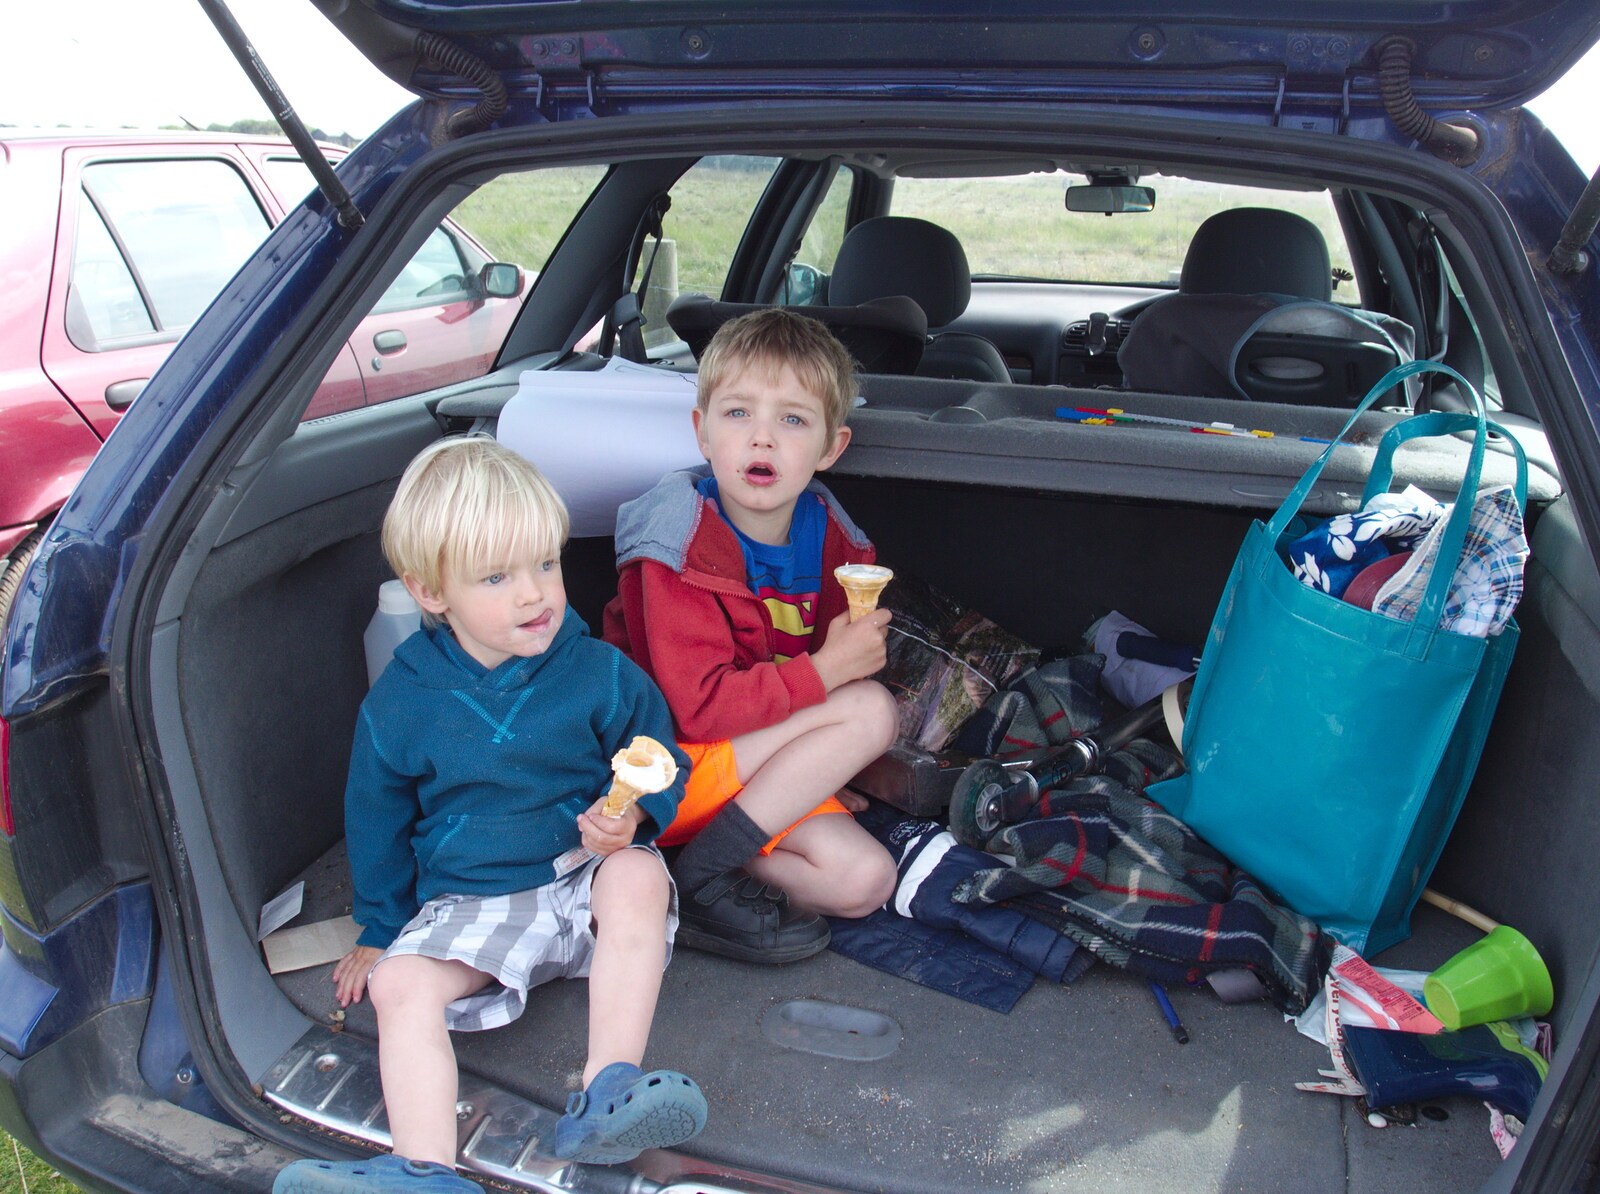 We wait for Isobel in the back of the car from Life's A Windy Beach, Walberswick, Suffolk - 5th May 2014